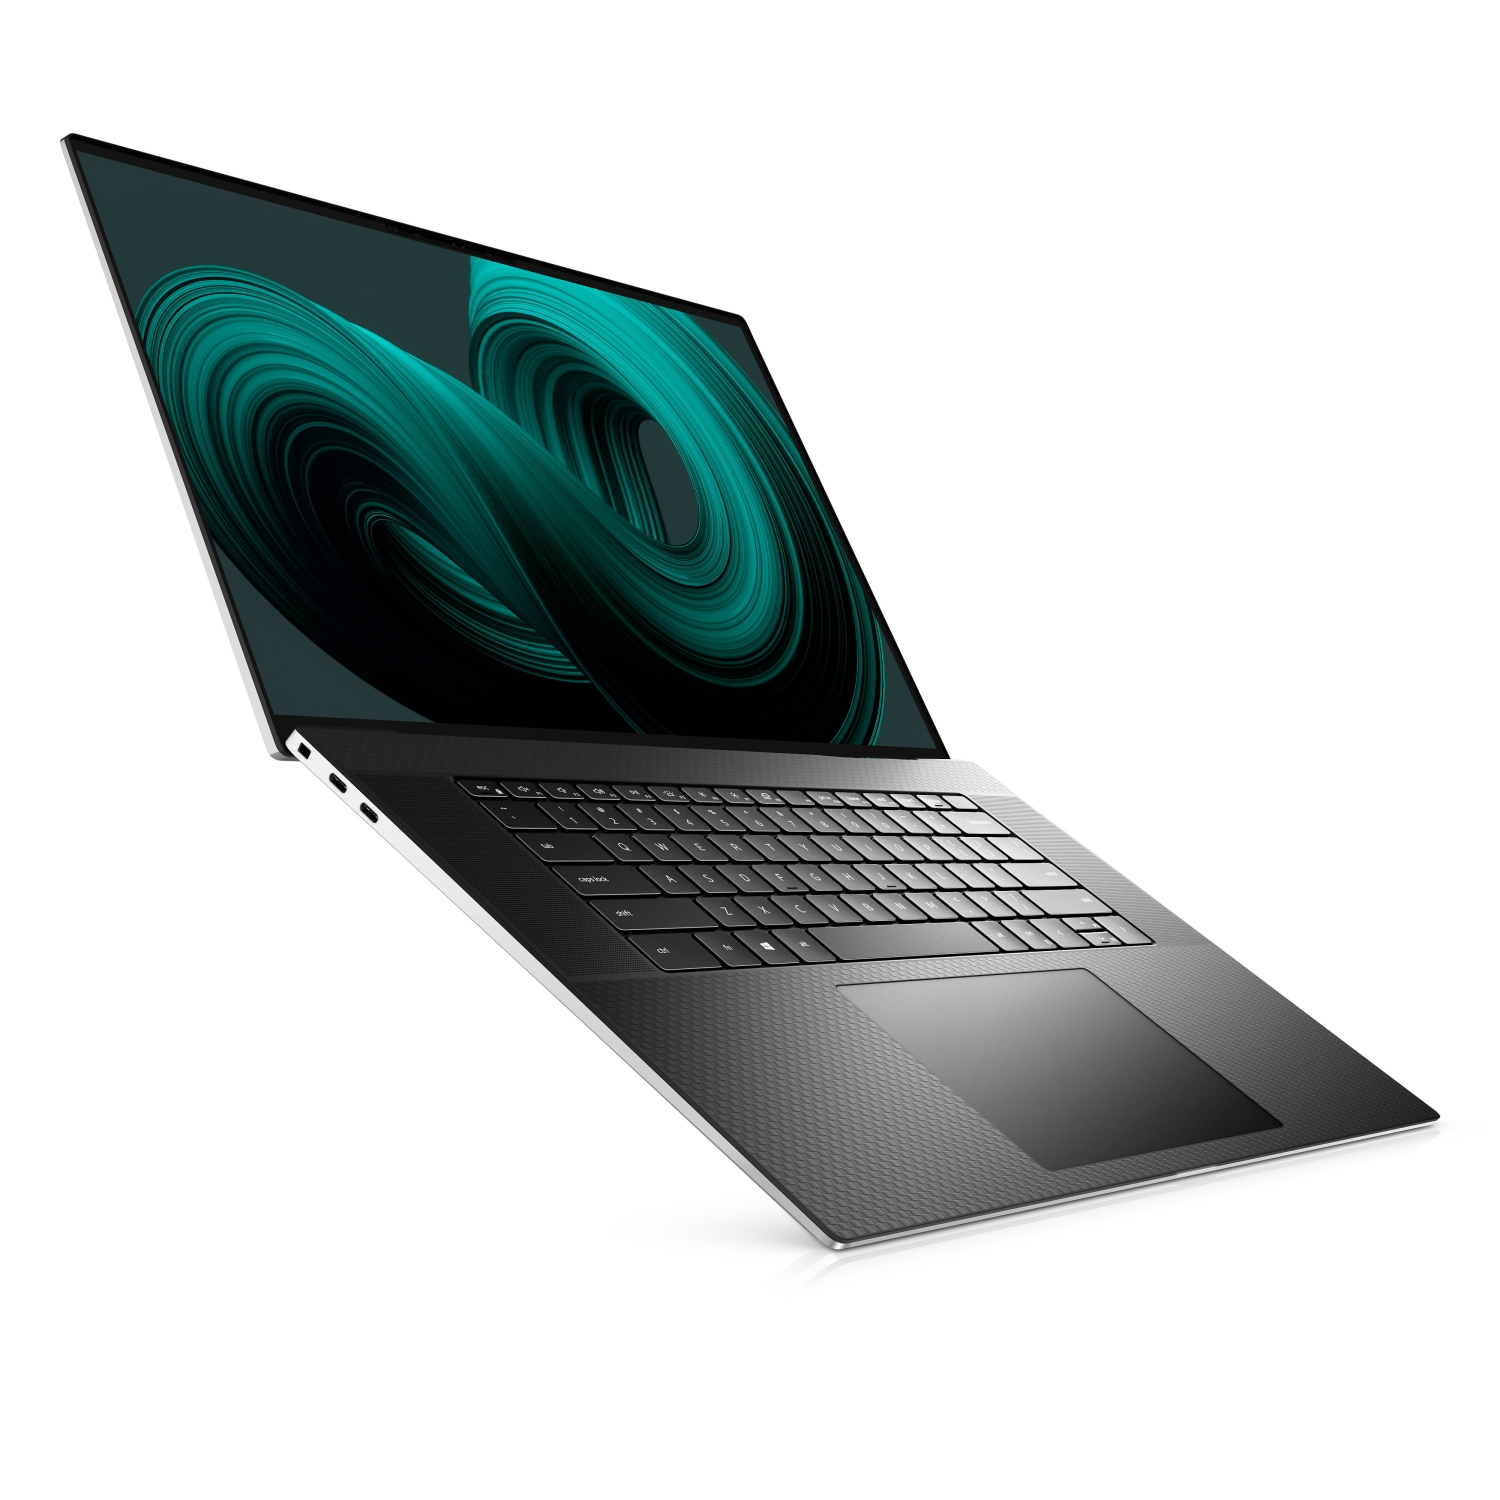 Refurbished (Excellent) - Dell XPS 17 9710 Laptop (2021) | 17" FHD+ | Core i7 - 512GB SSD - 16GB RAM - RTX 3050 | 8 Cores @ 4.6 GHz - 11th Gen CPU Certified Refurbished